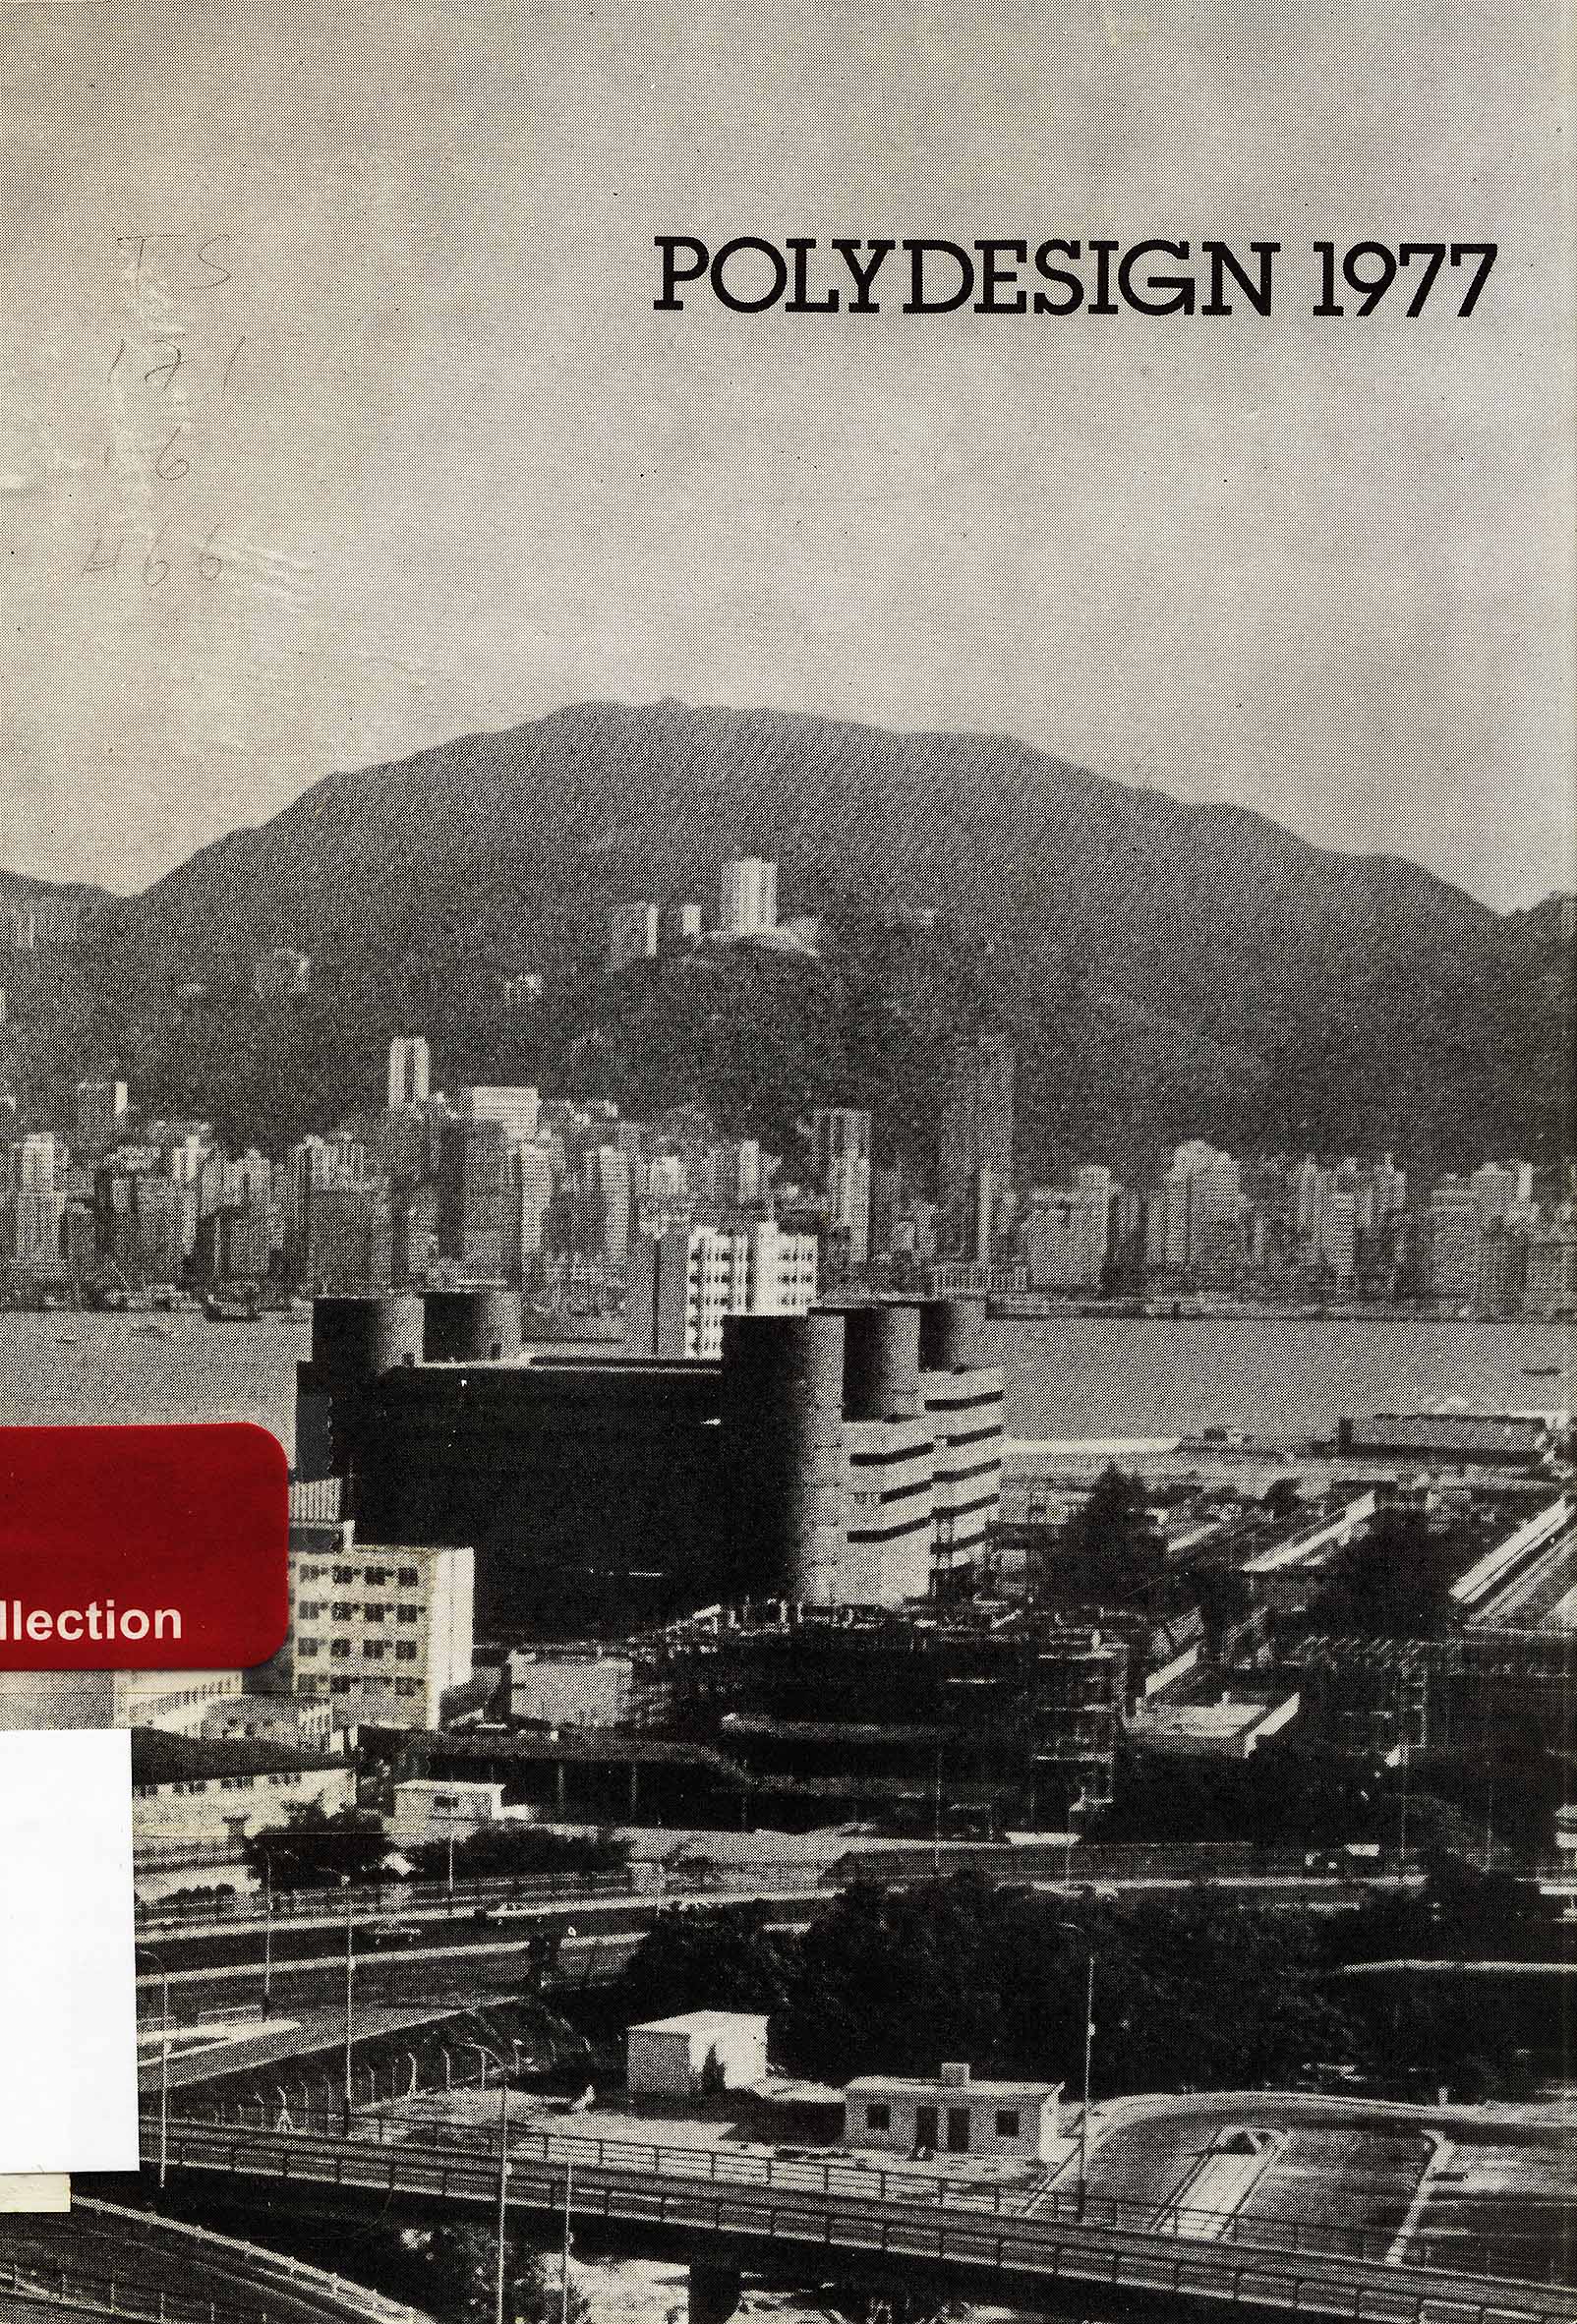 Polydesign 1977 - Student designs in Hong Kong